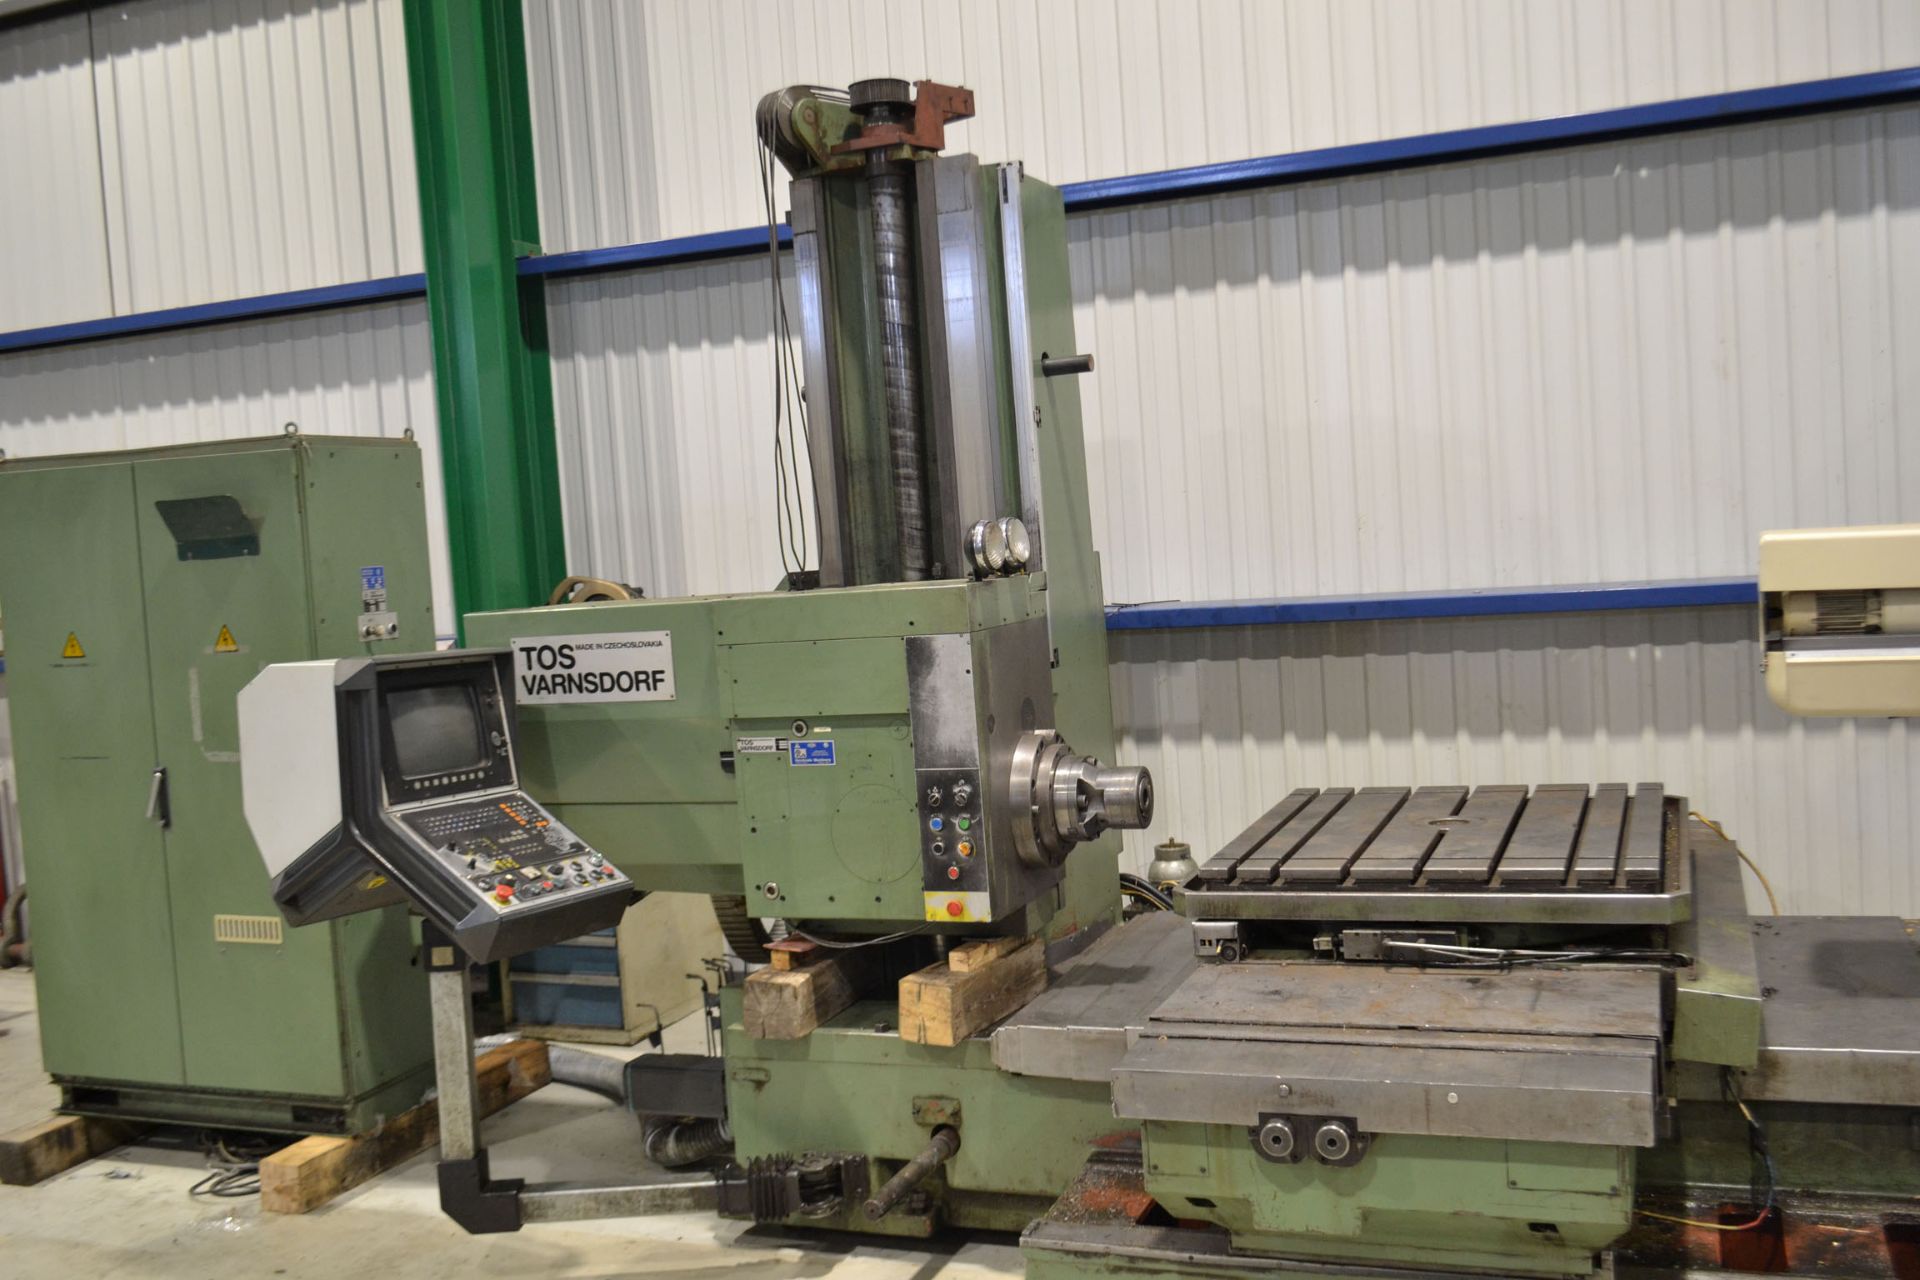 TOS VARNSDORF TABLE TYPE HORIZ. BORING MILL MODEL: WH 10 CNC, WORK SPINDLE DIAMETER: 100 MM (4”) - Image 2 of 4